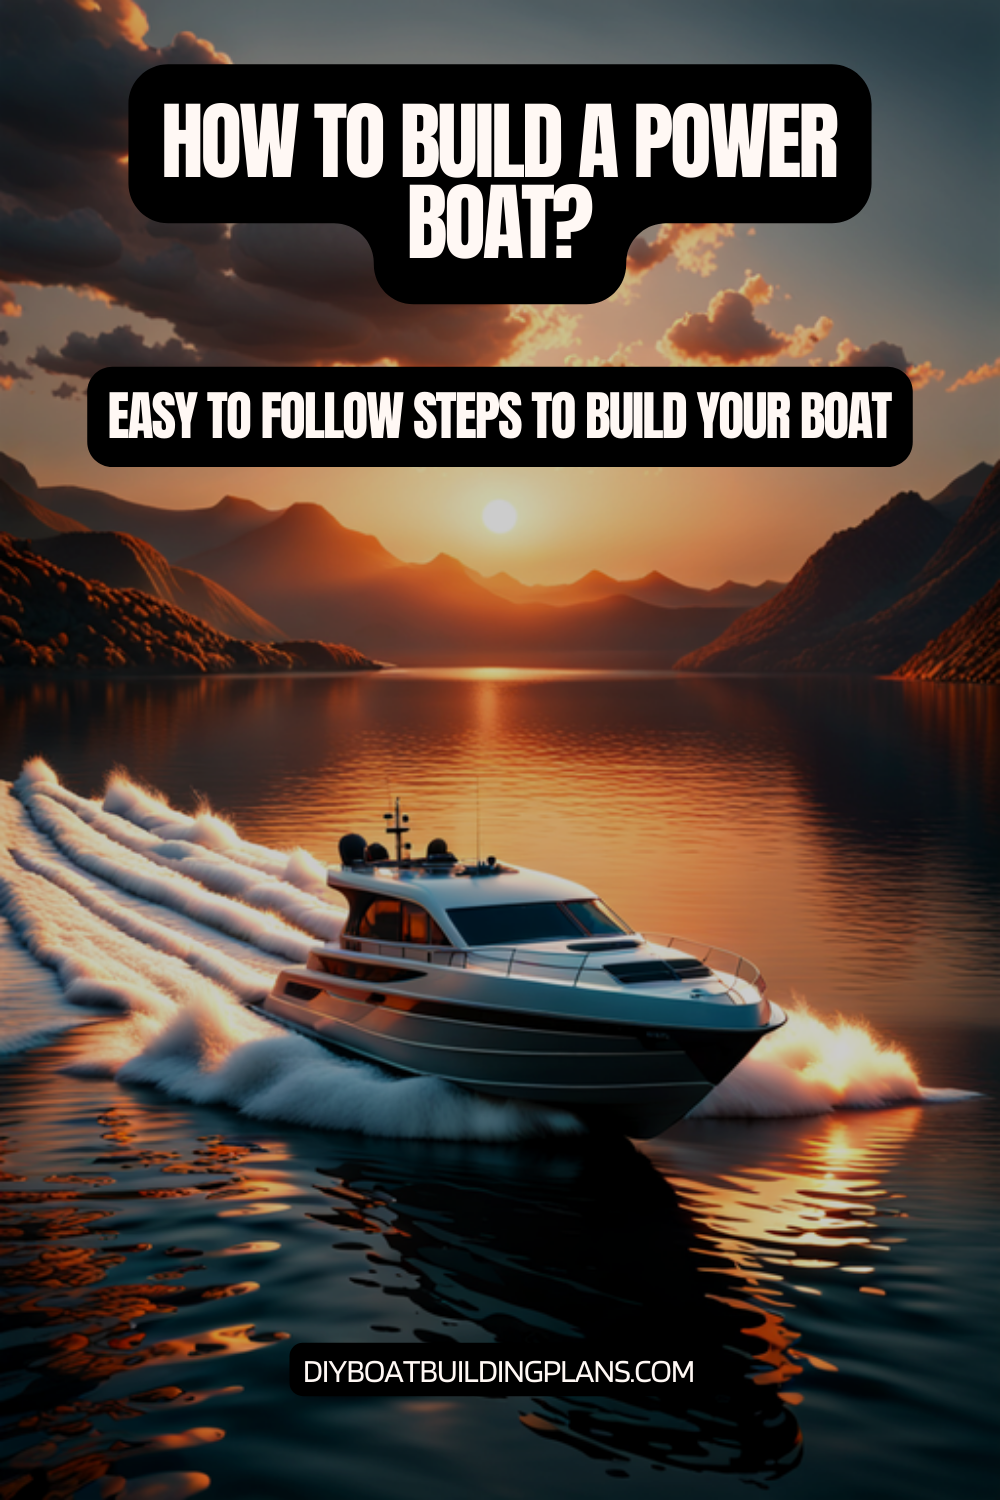 How To Build a Power Boat